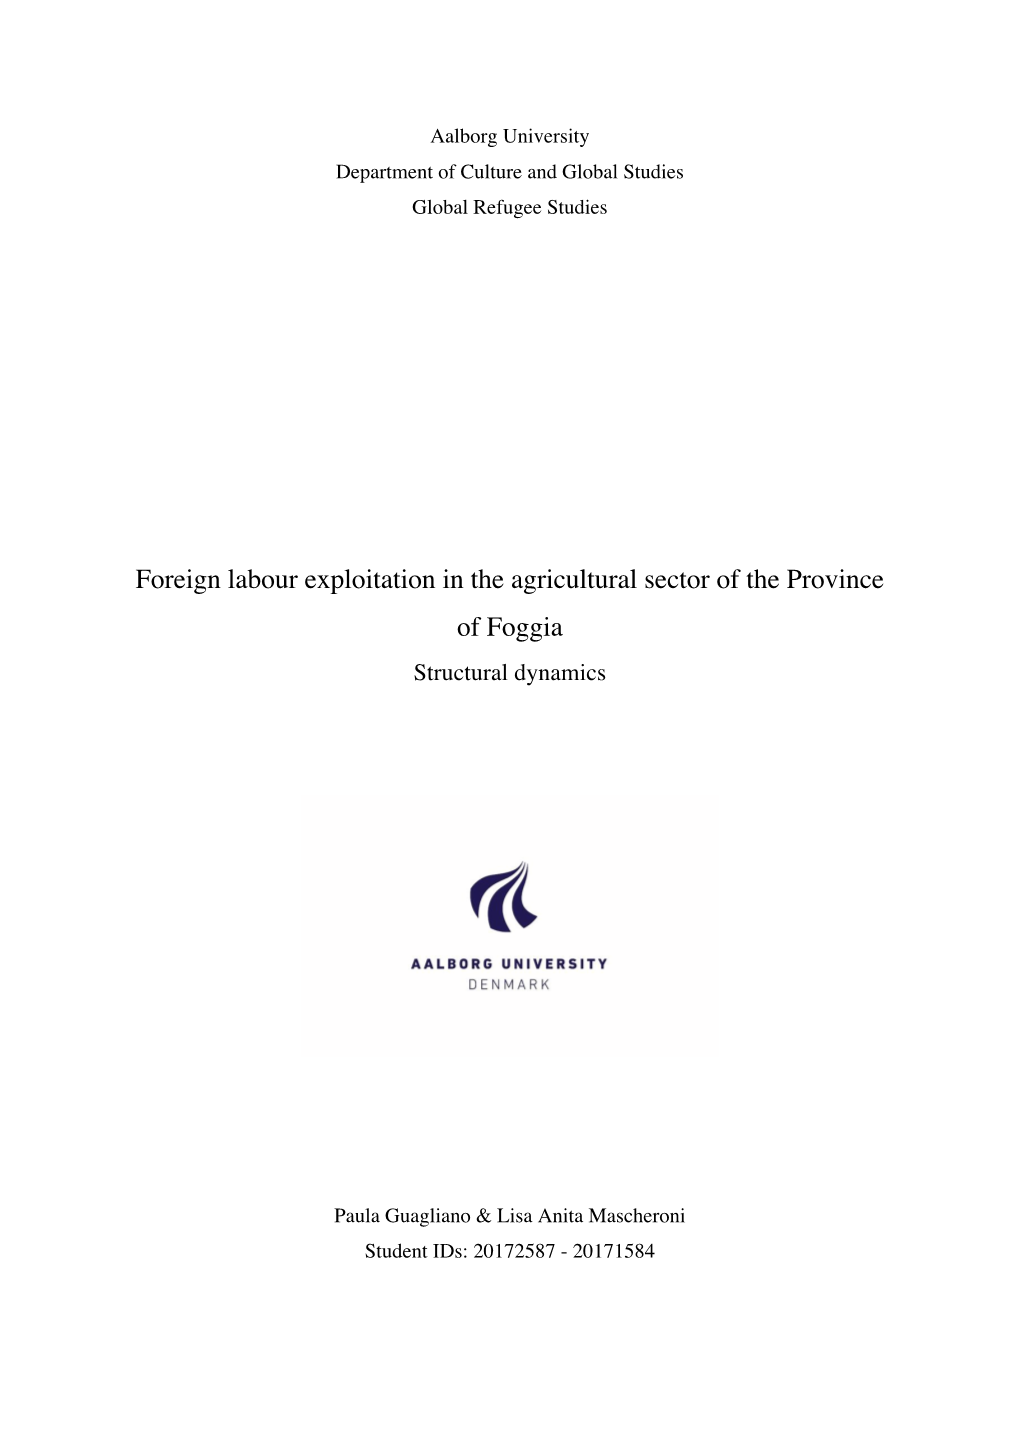 Foreign Labour Exploitation in the Agricultural Sector of the Province of Foggia Structural Dynamics